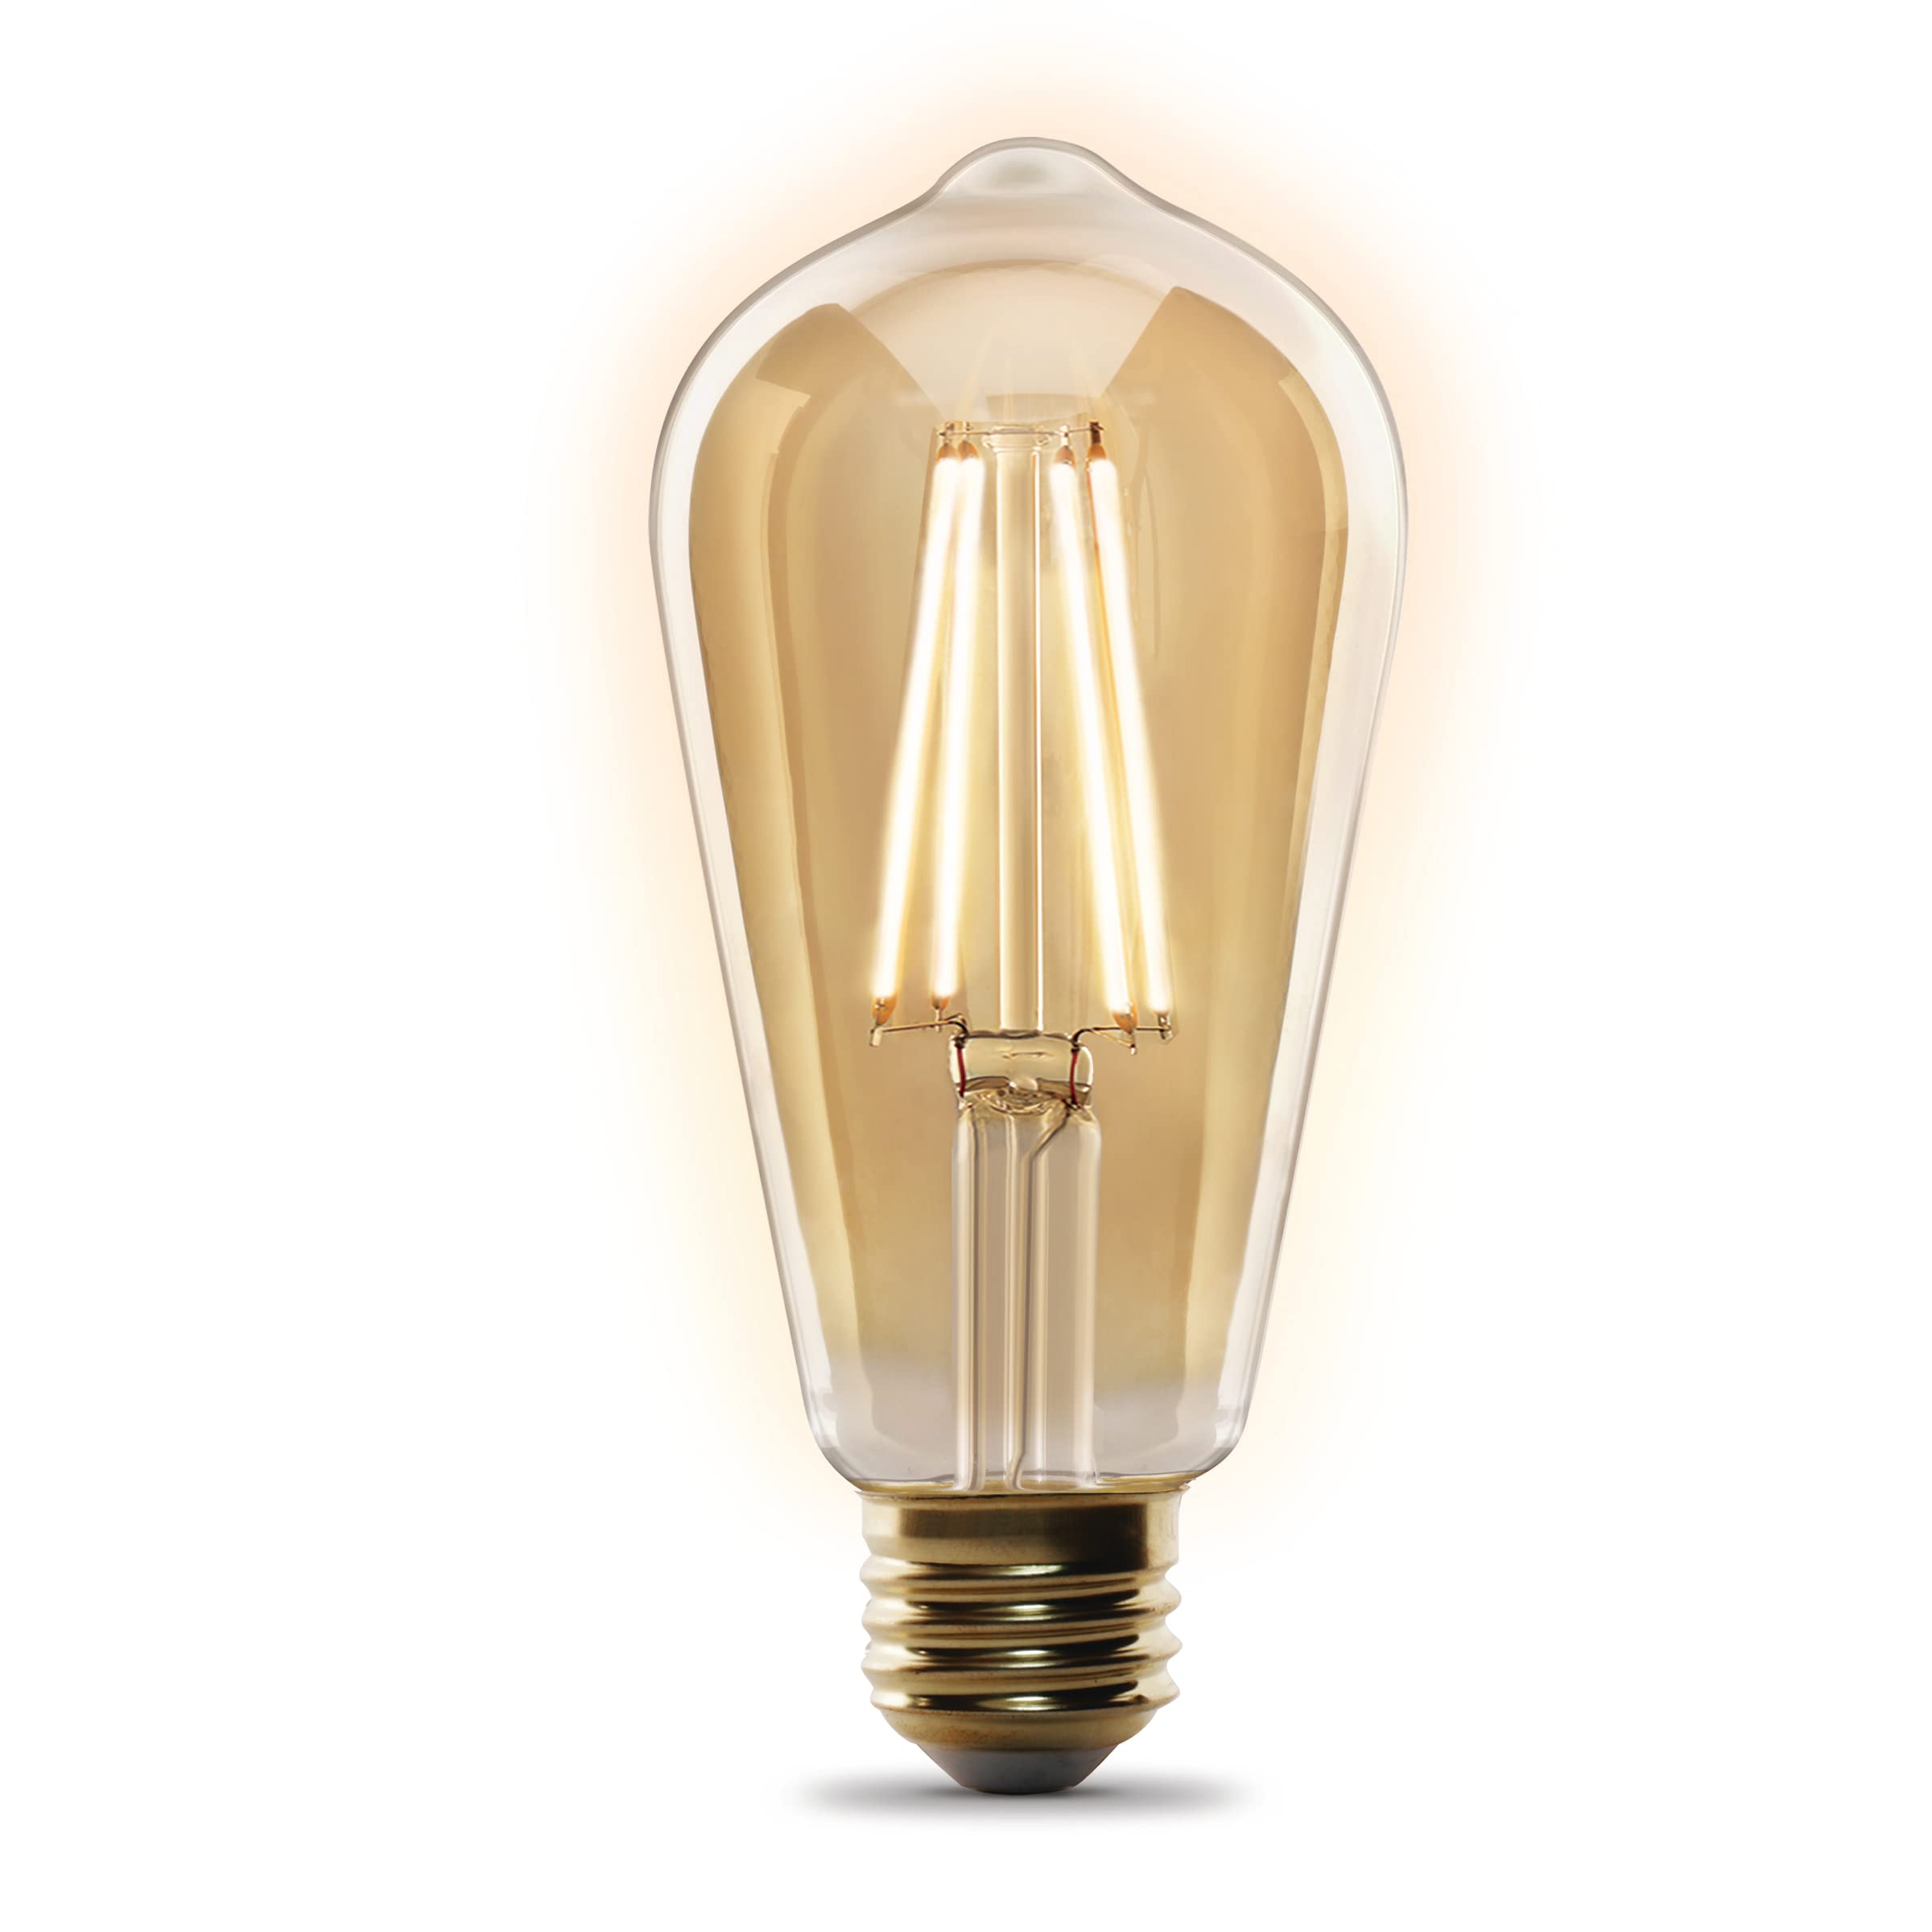 Feit Electric ST1960/FIL/AG 60 Watt Equivalent WiFi Dimmable, No Hub Required, Alexa or Google Assistant ST19 Edison Vintage LED Smart Light Bulb, Yellow, 5.4